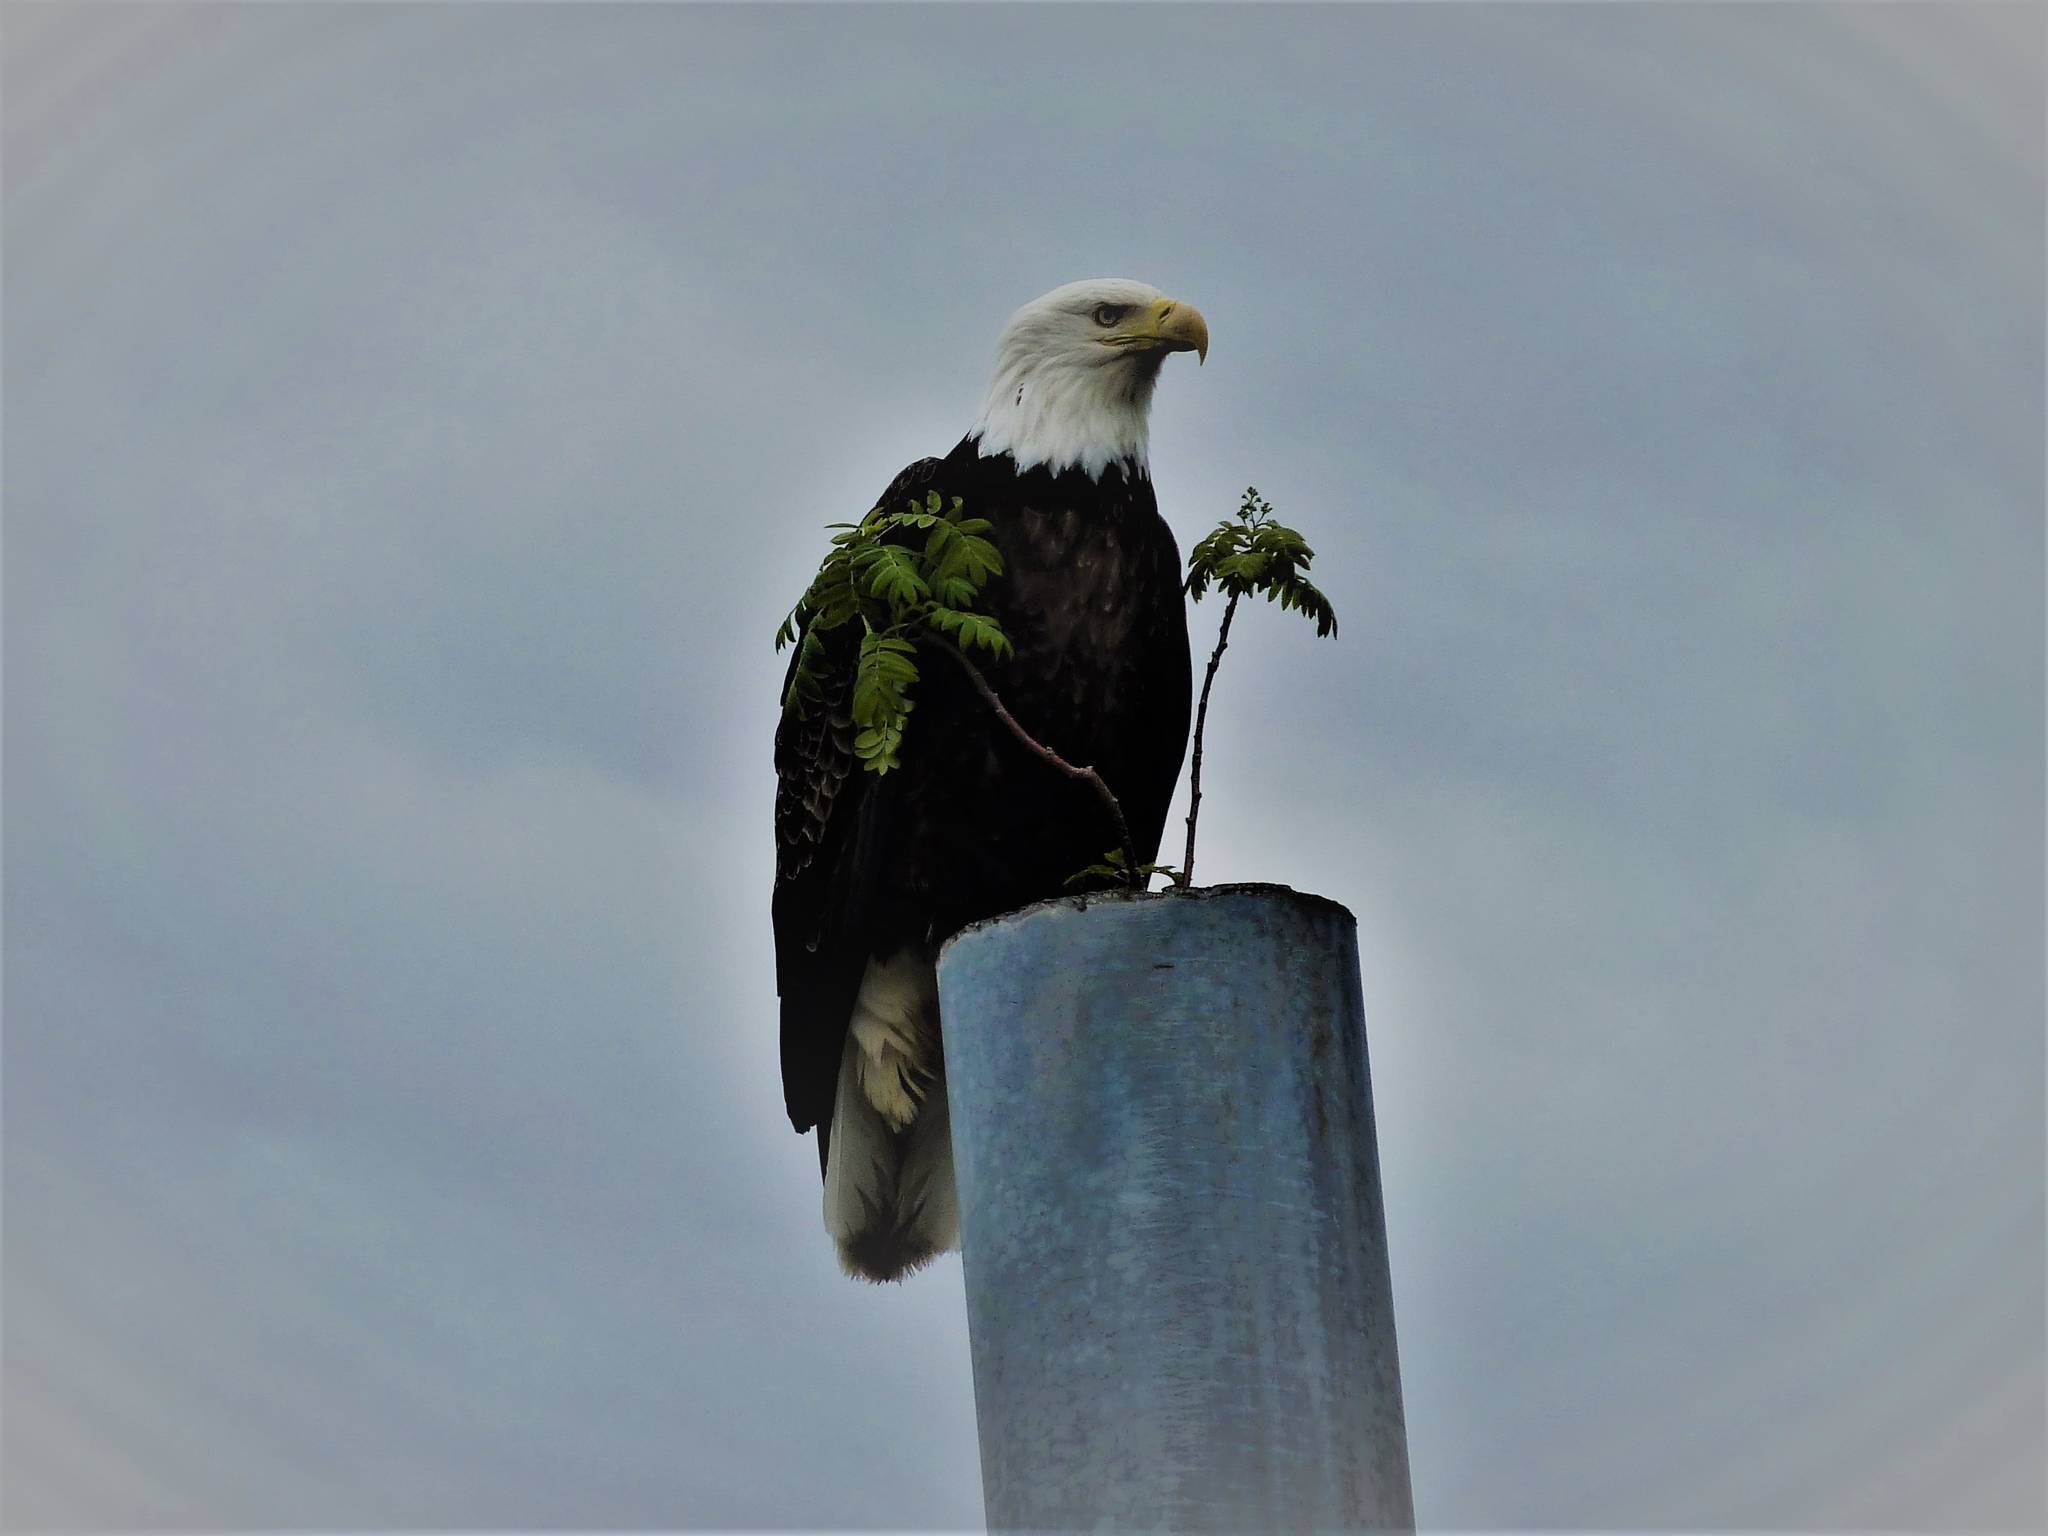 Adult bald eagle inspecting his mountain ash trees on top of a piling at Tee Harbor May 27, 2021. (Courtesy Photo / David Athearn)